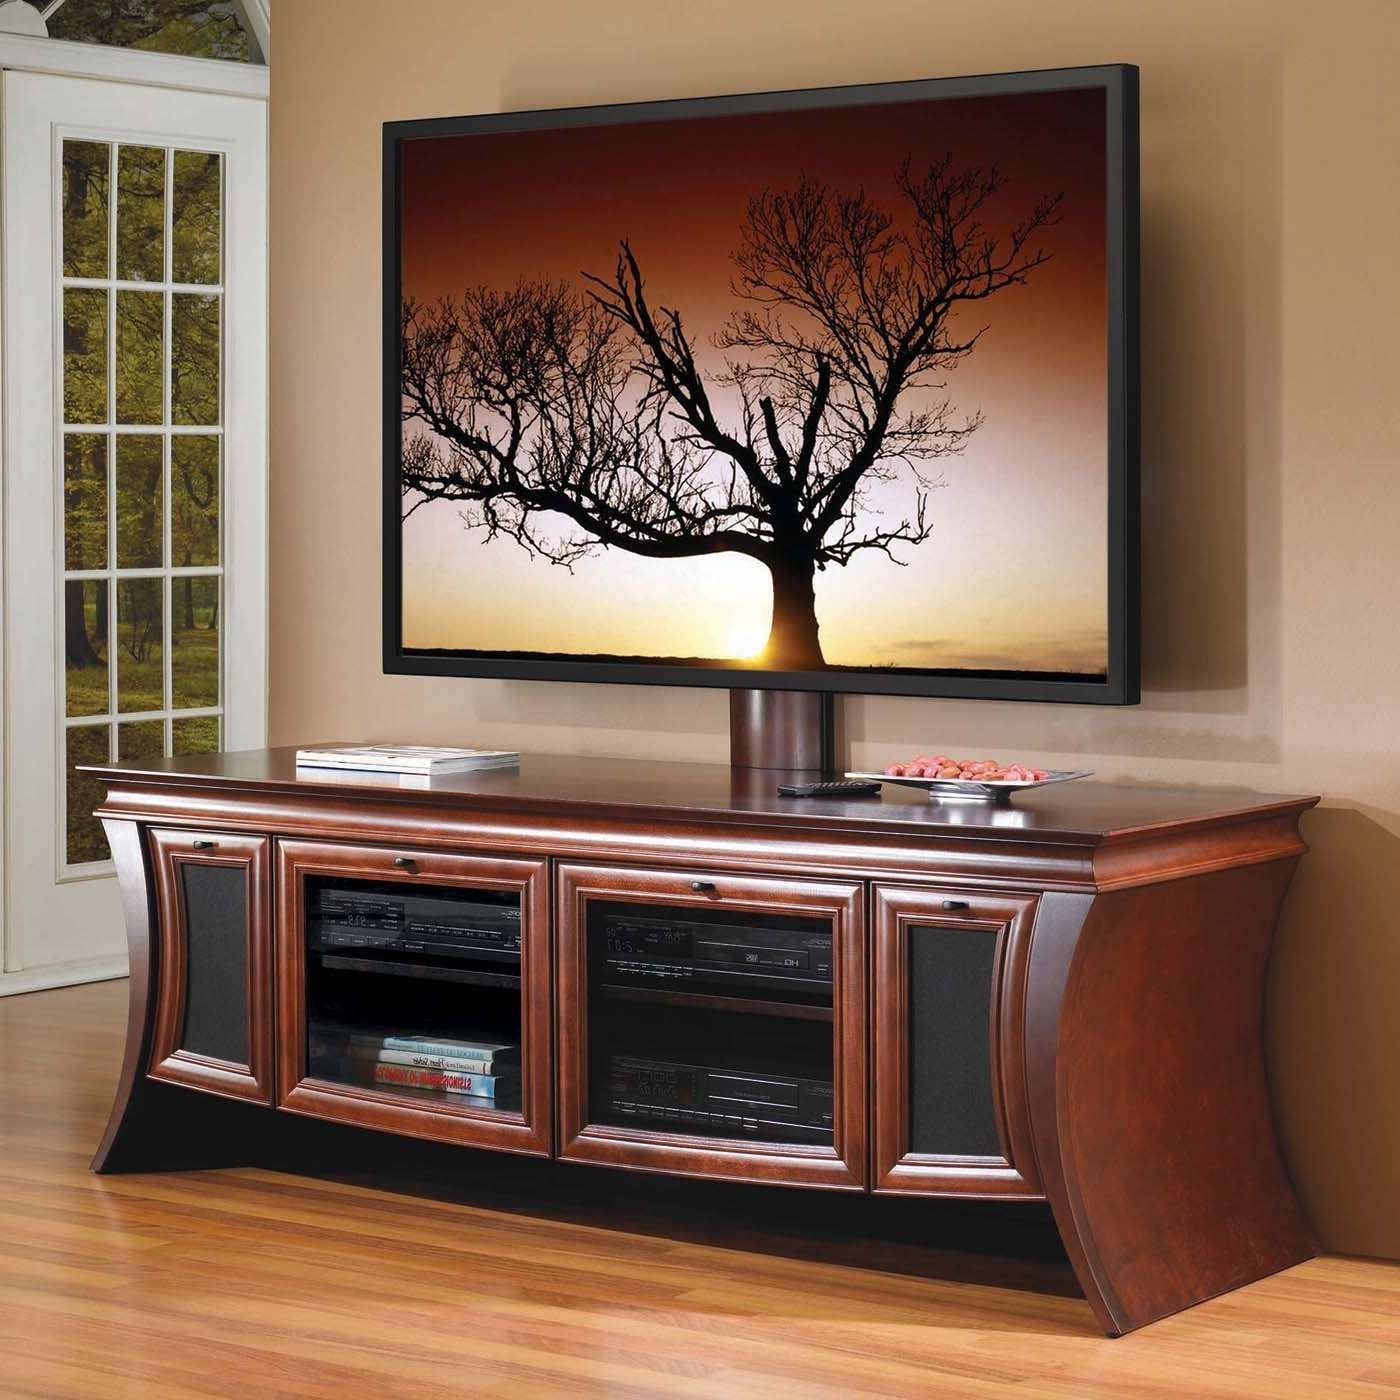 Large Brown Lacquered Mahogany Wood Media Console With Glass Doors Intended For Maple Tv Stands For Flat Screens (Gallery 1 of 15)